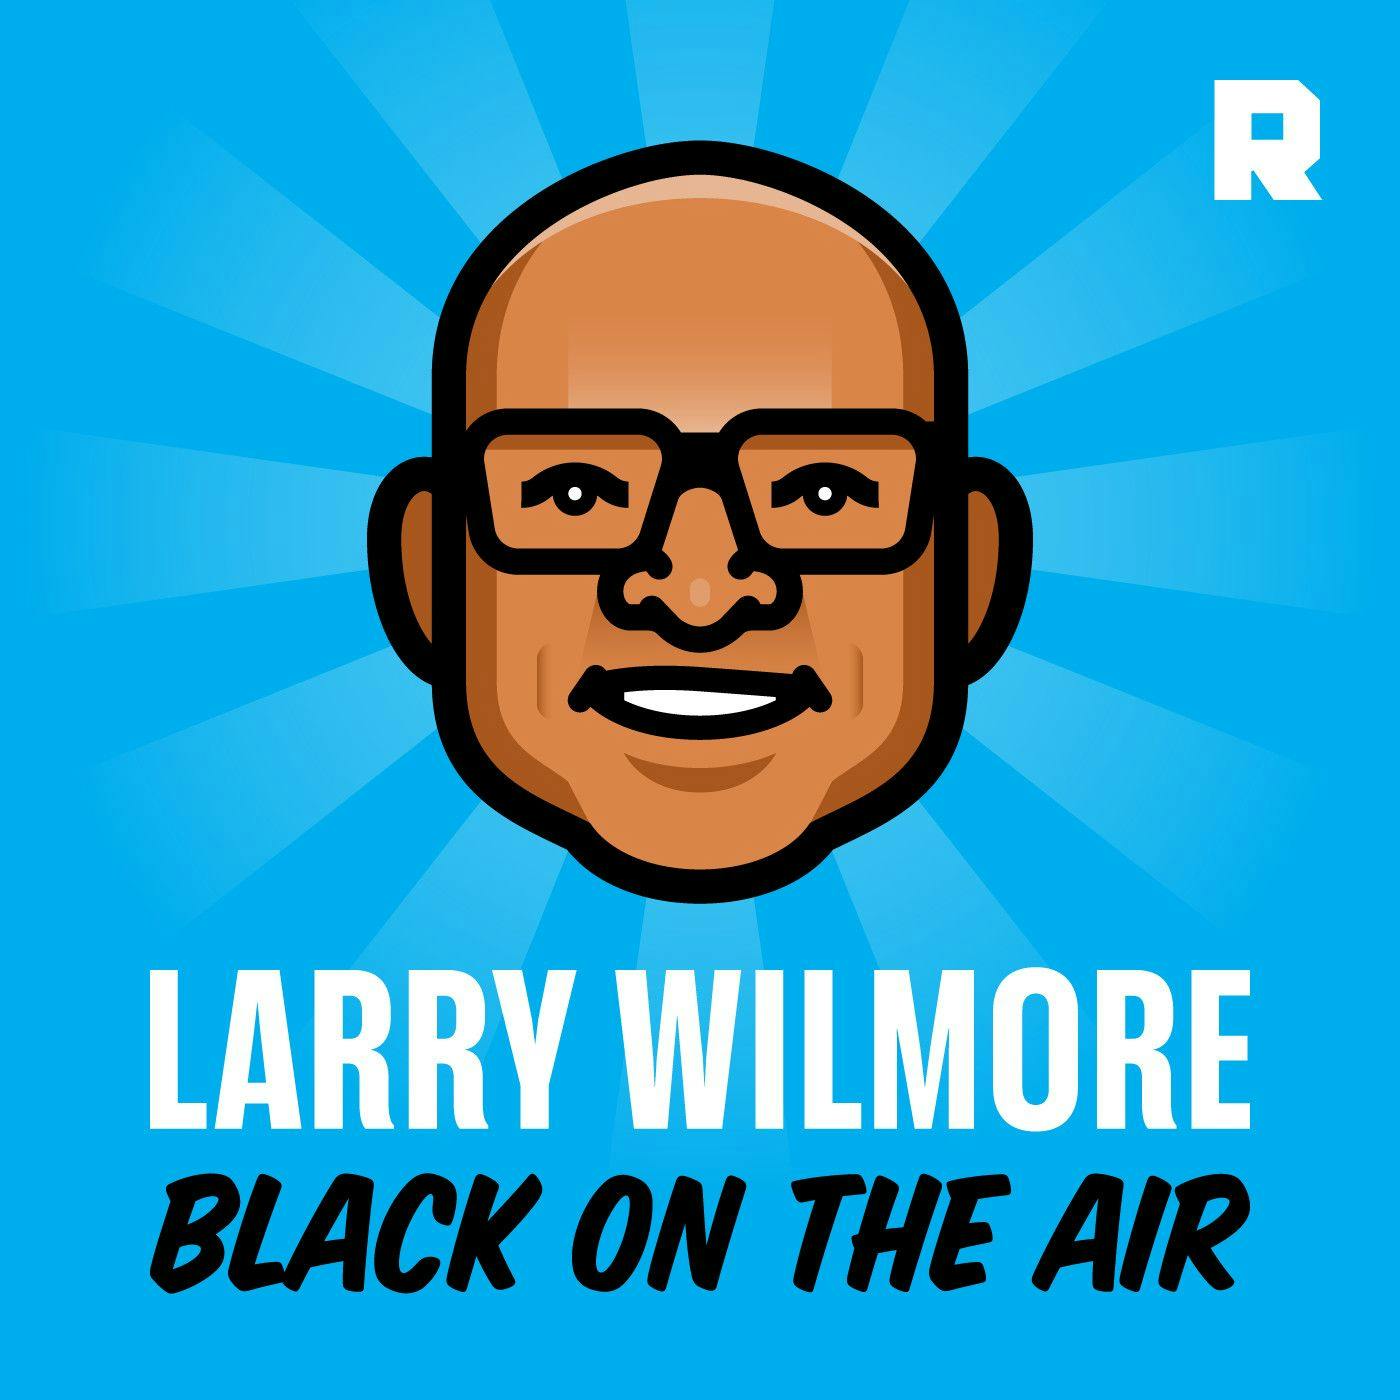 What the Democrats Need to Do to Win in 2020 With Jon Favreau | Larry Wilmore: Black on the Air